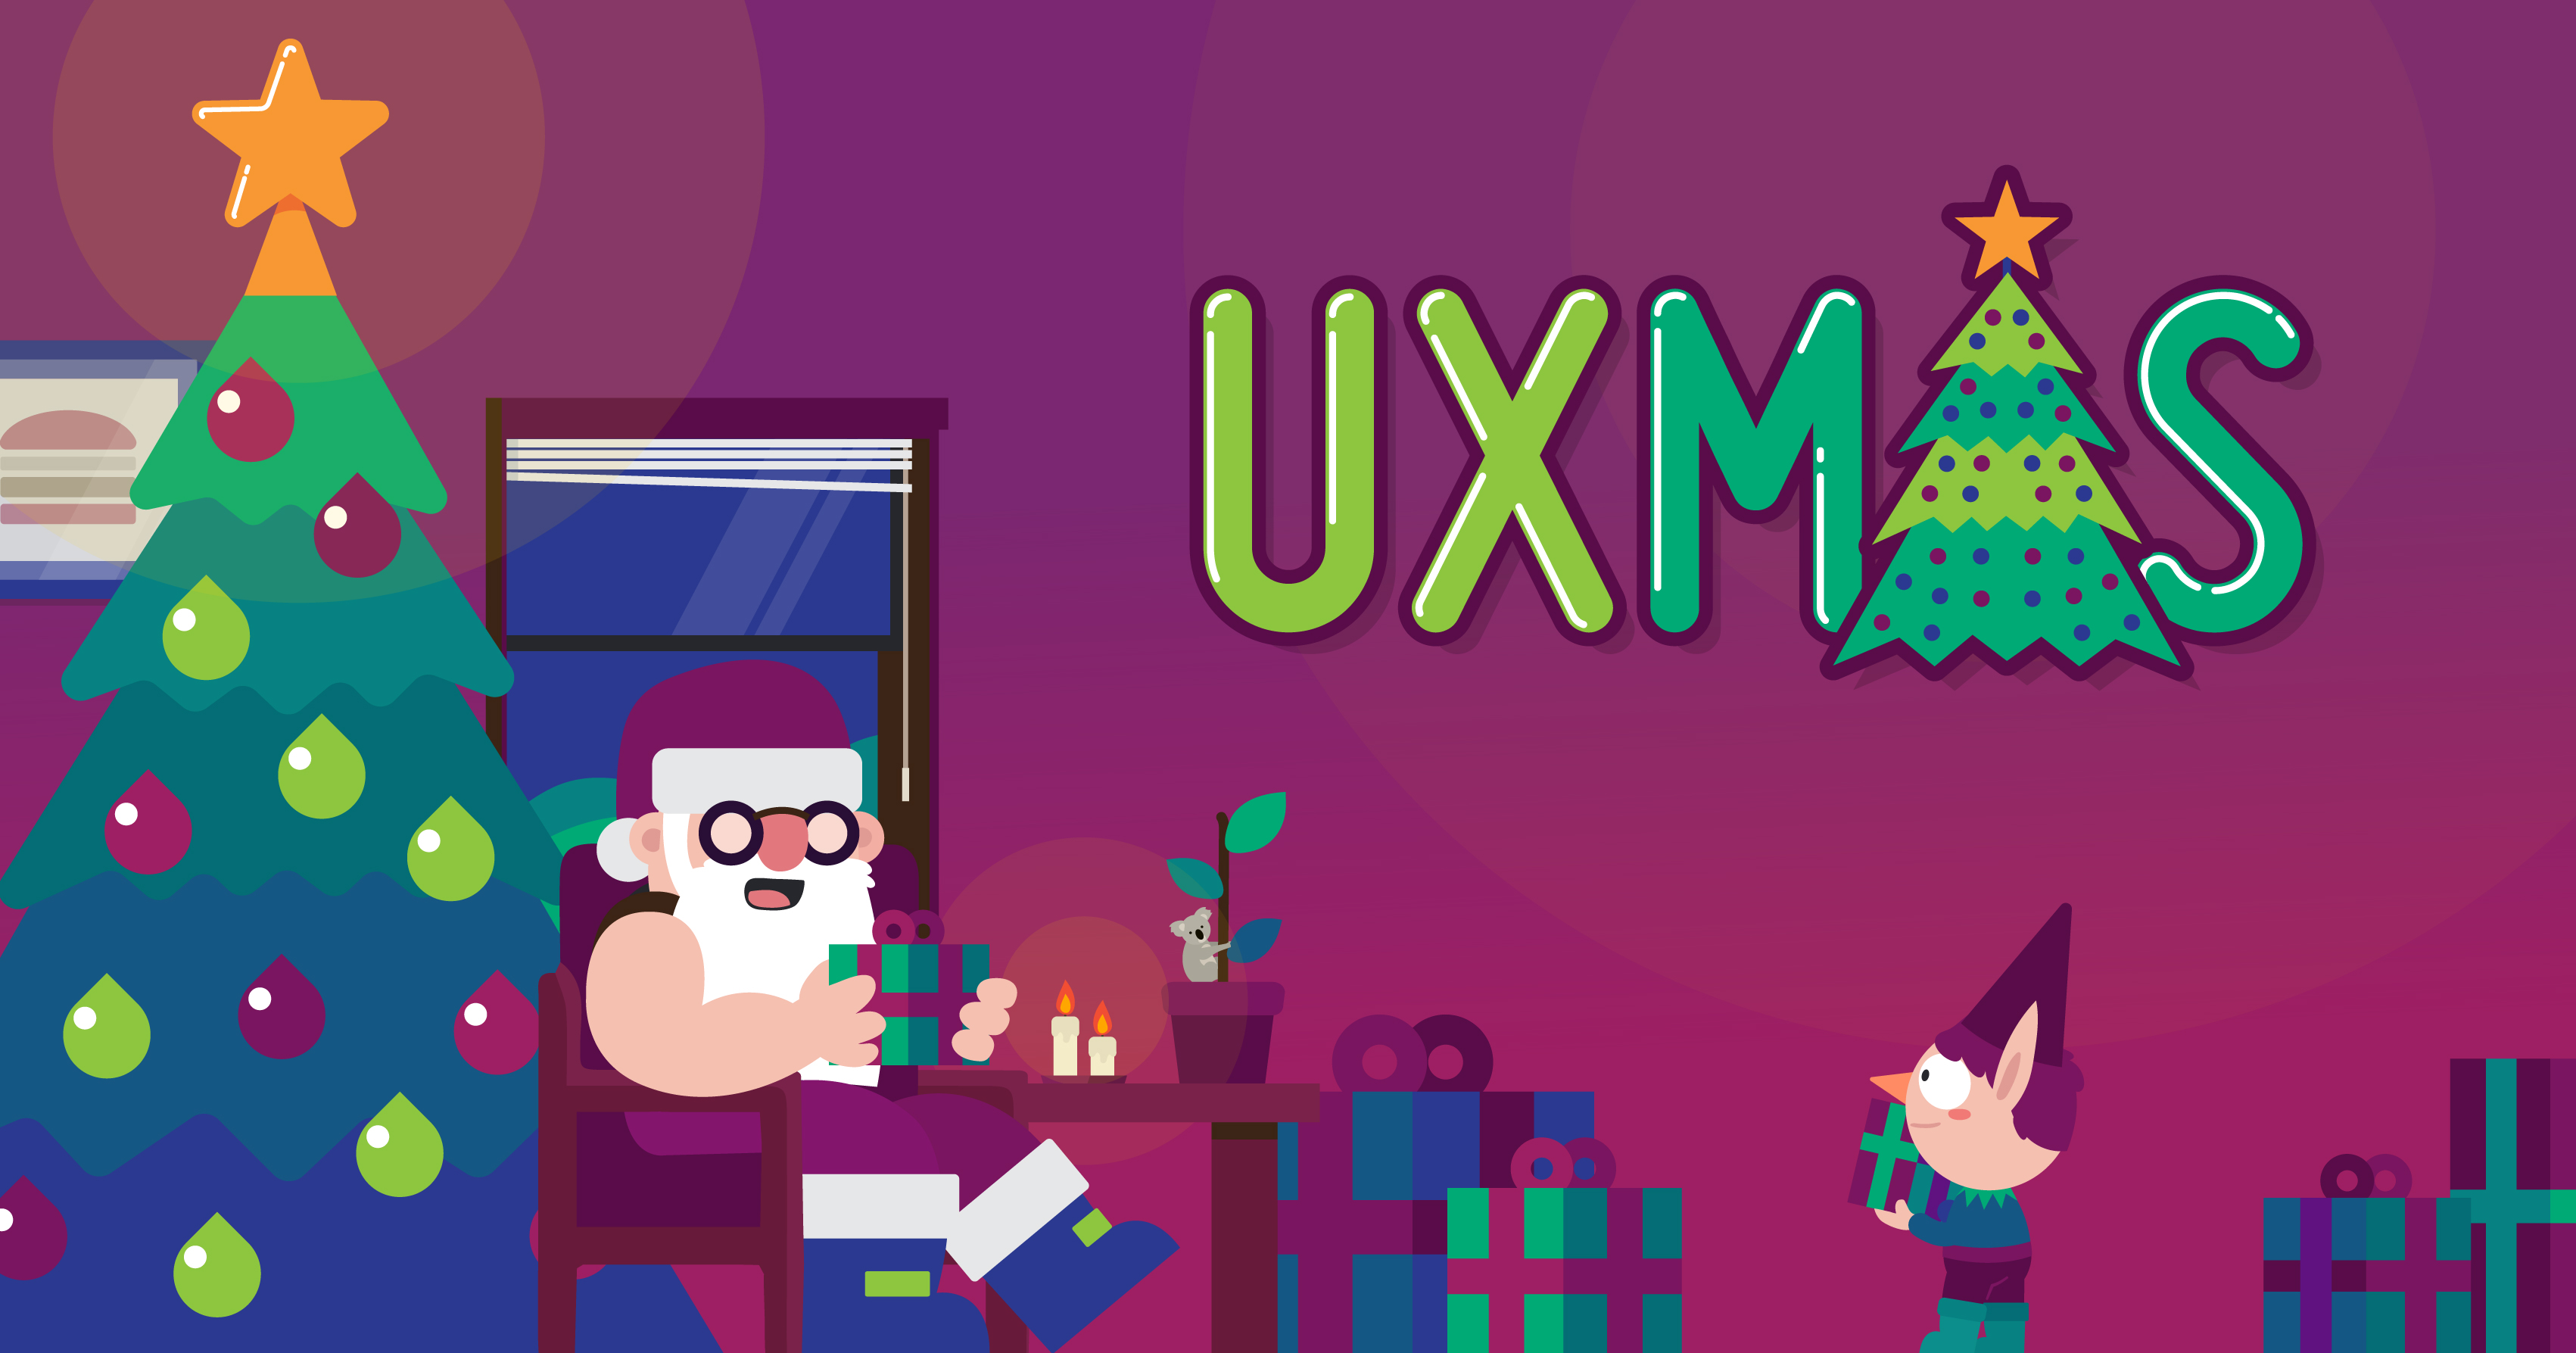 Pricing page example #576: UXmas - An advent calendar for UX folk!